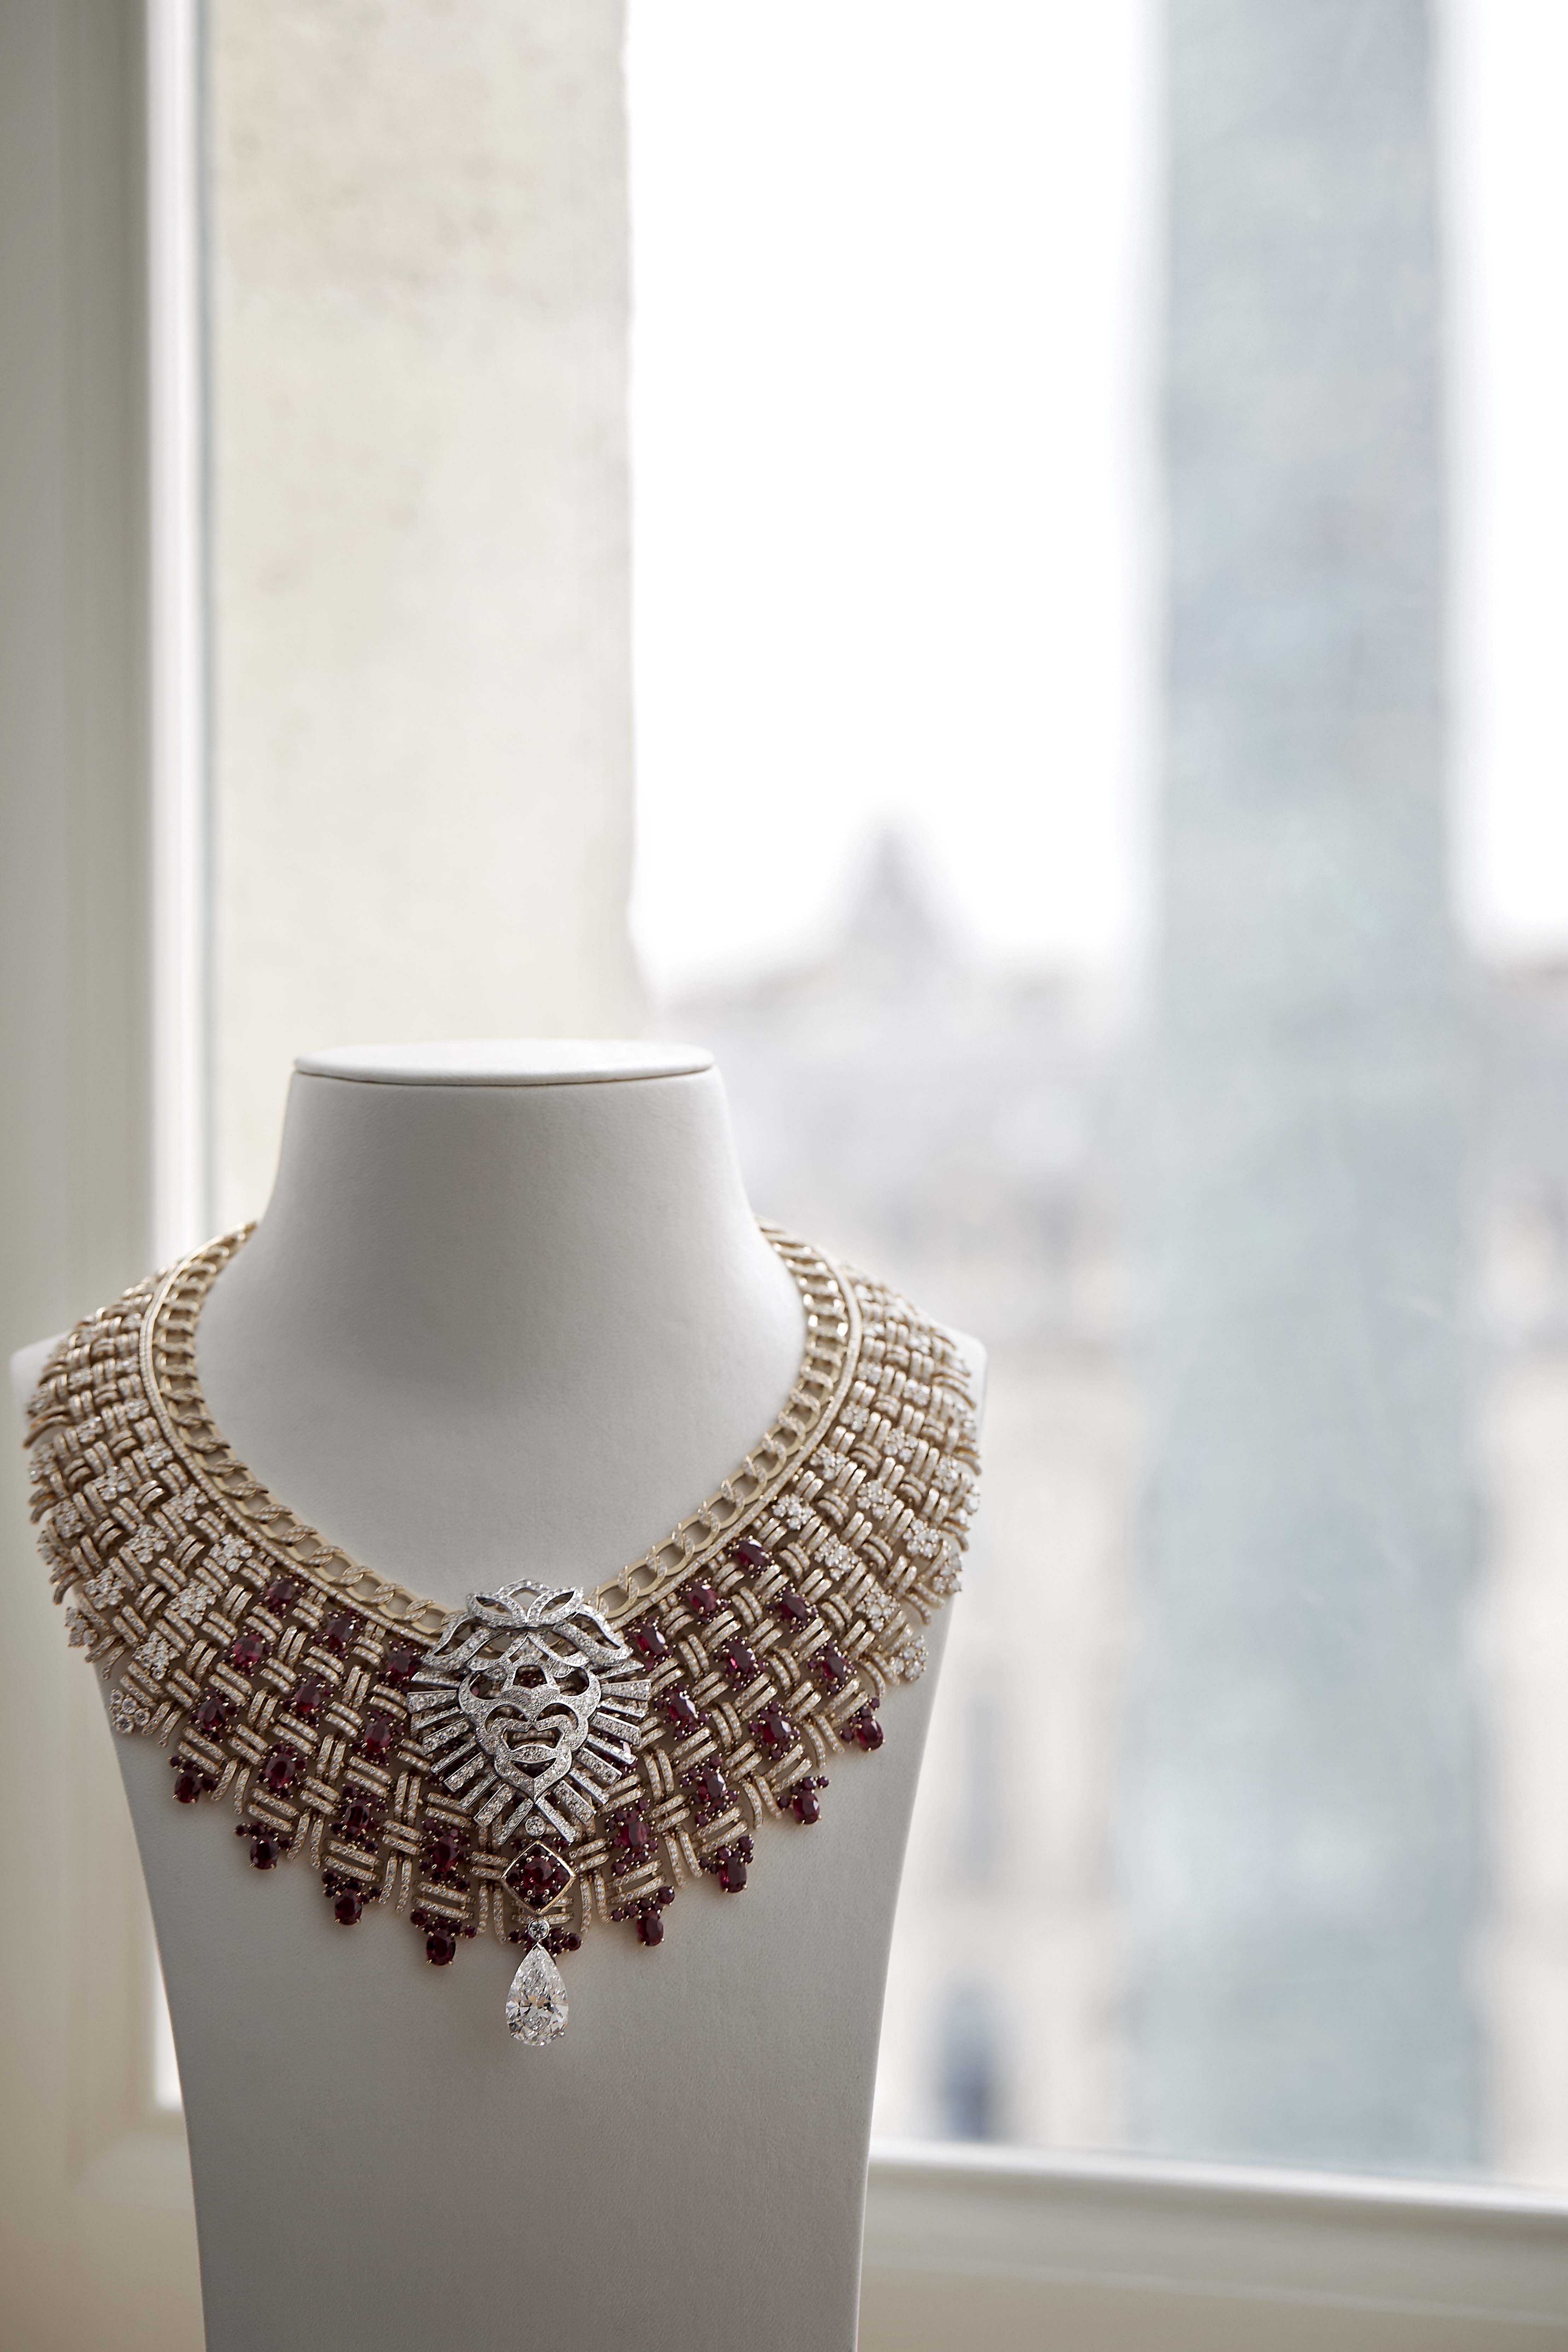 Chanel's new high jewellery collection was inspired by tweed